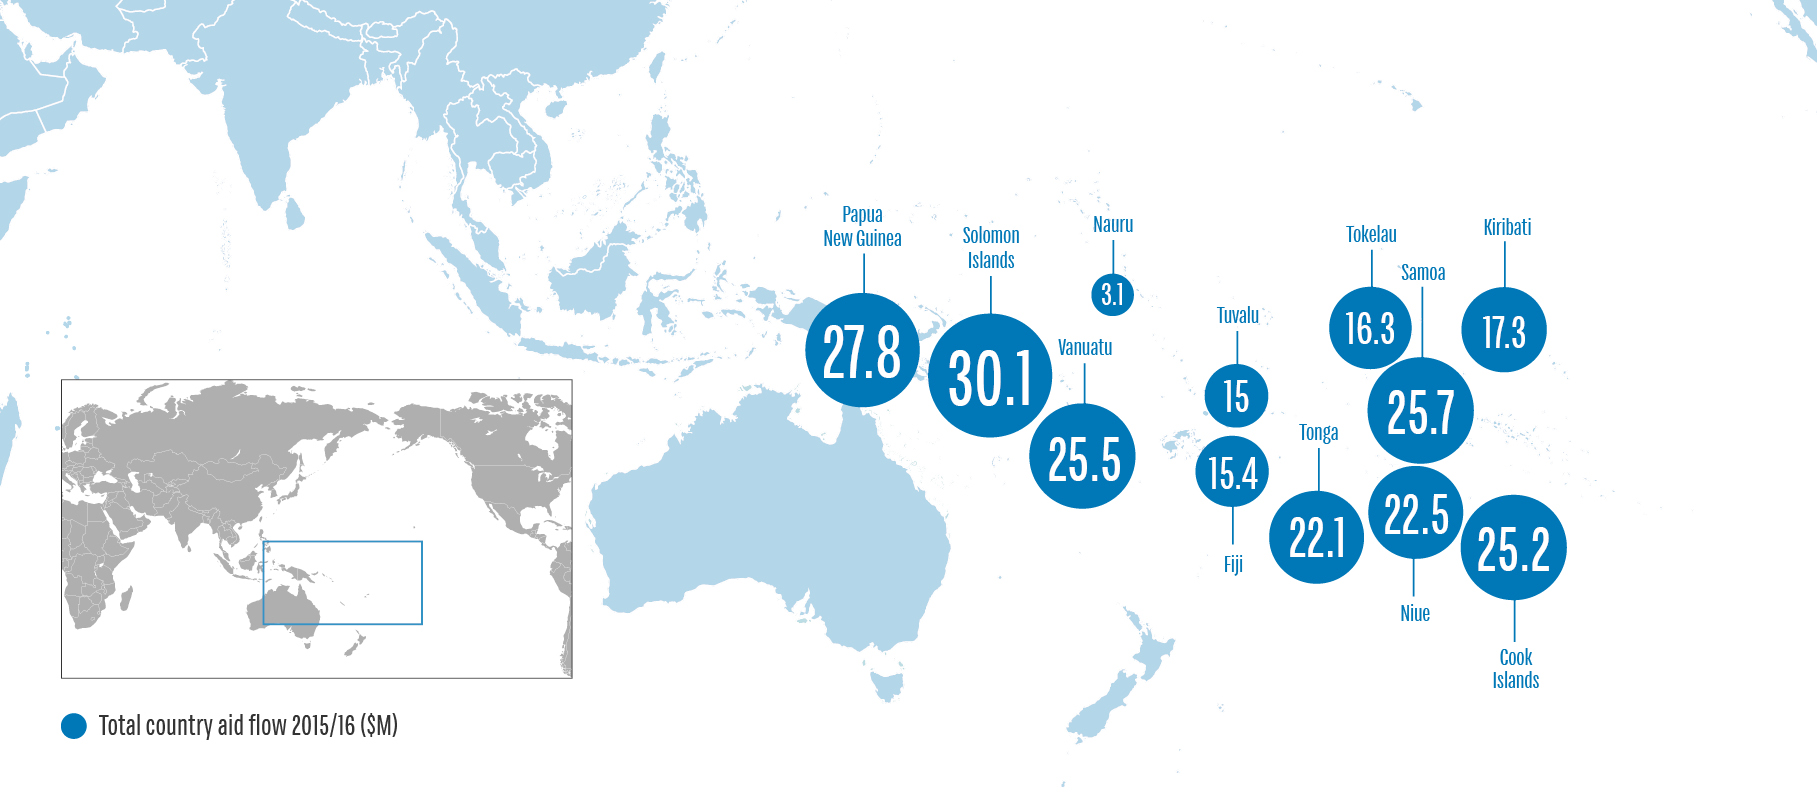 NZ Aid and Development Funding in the Pacific 2015-16